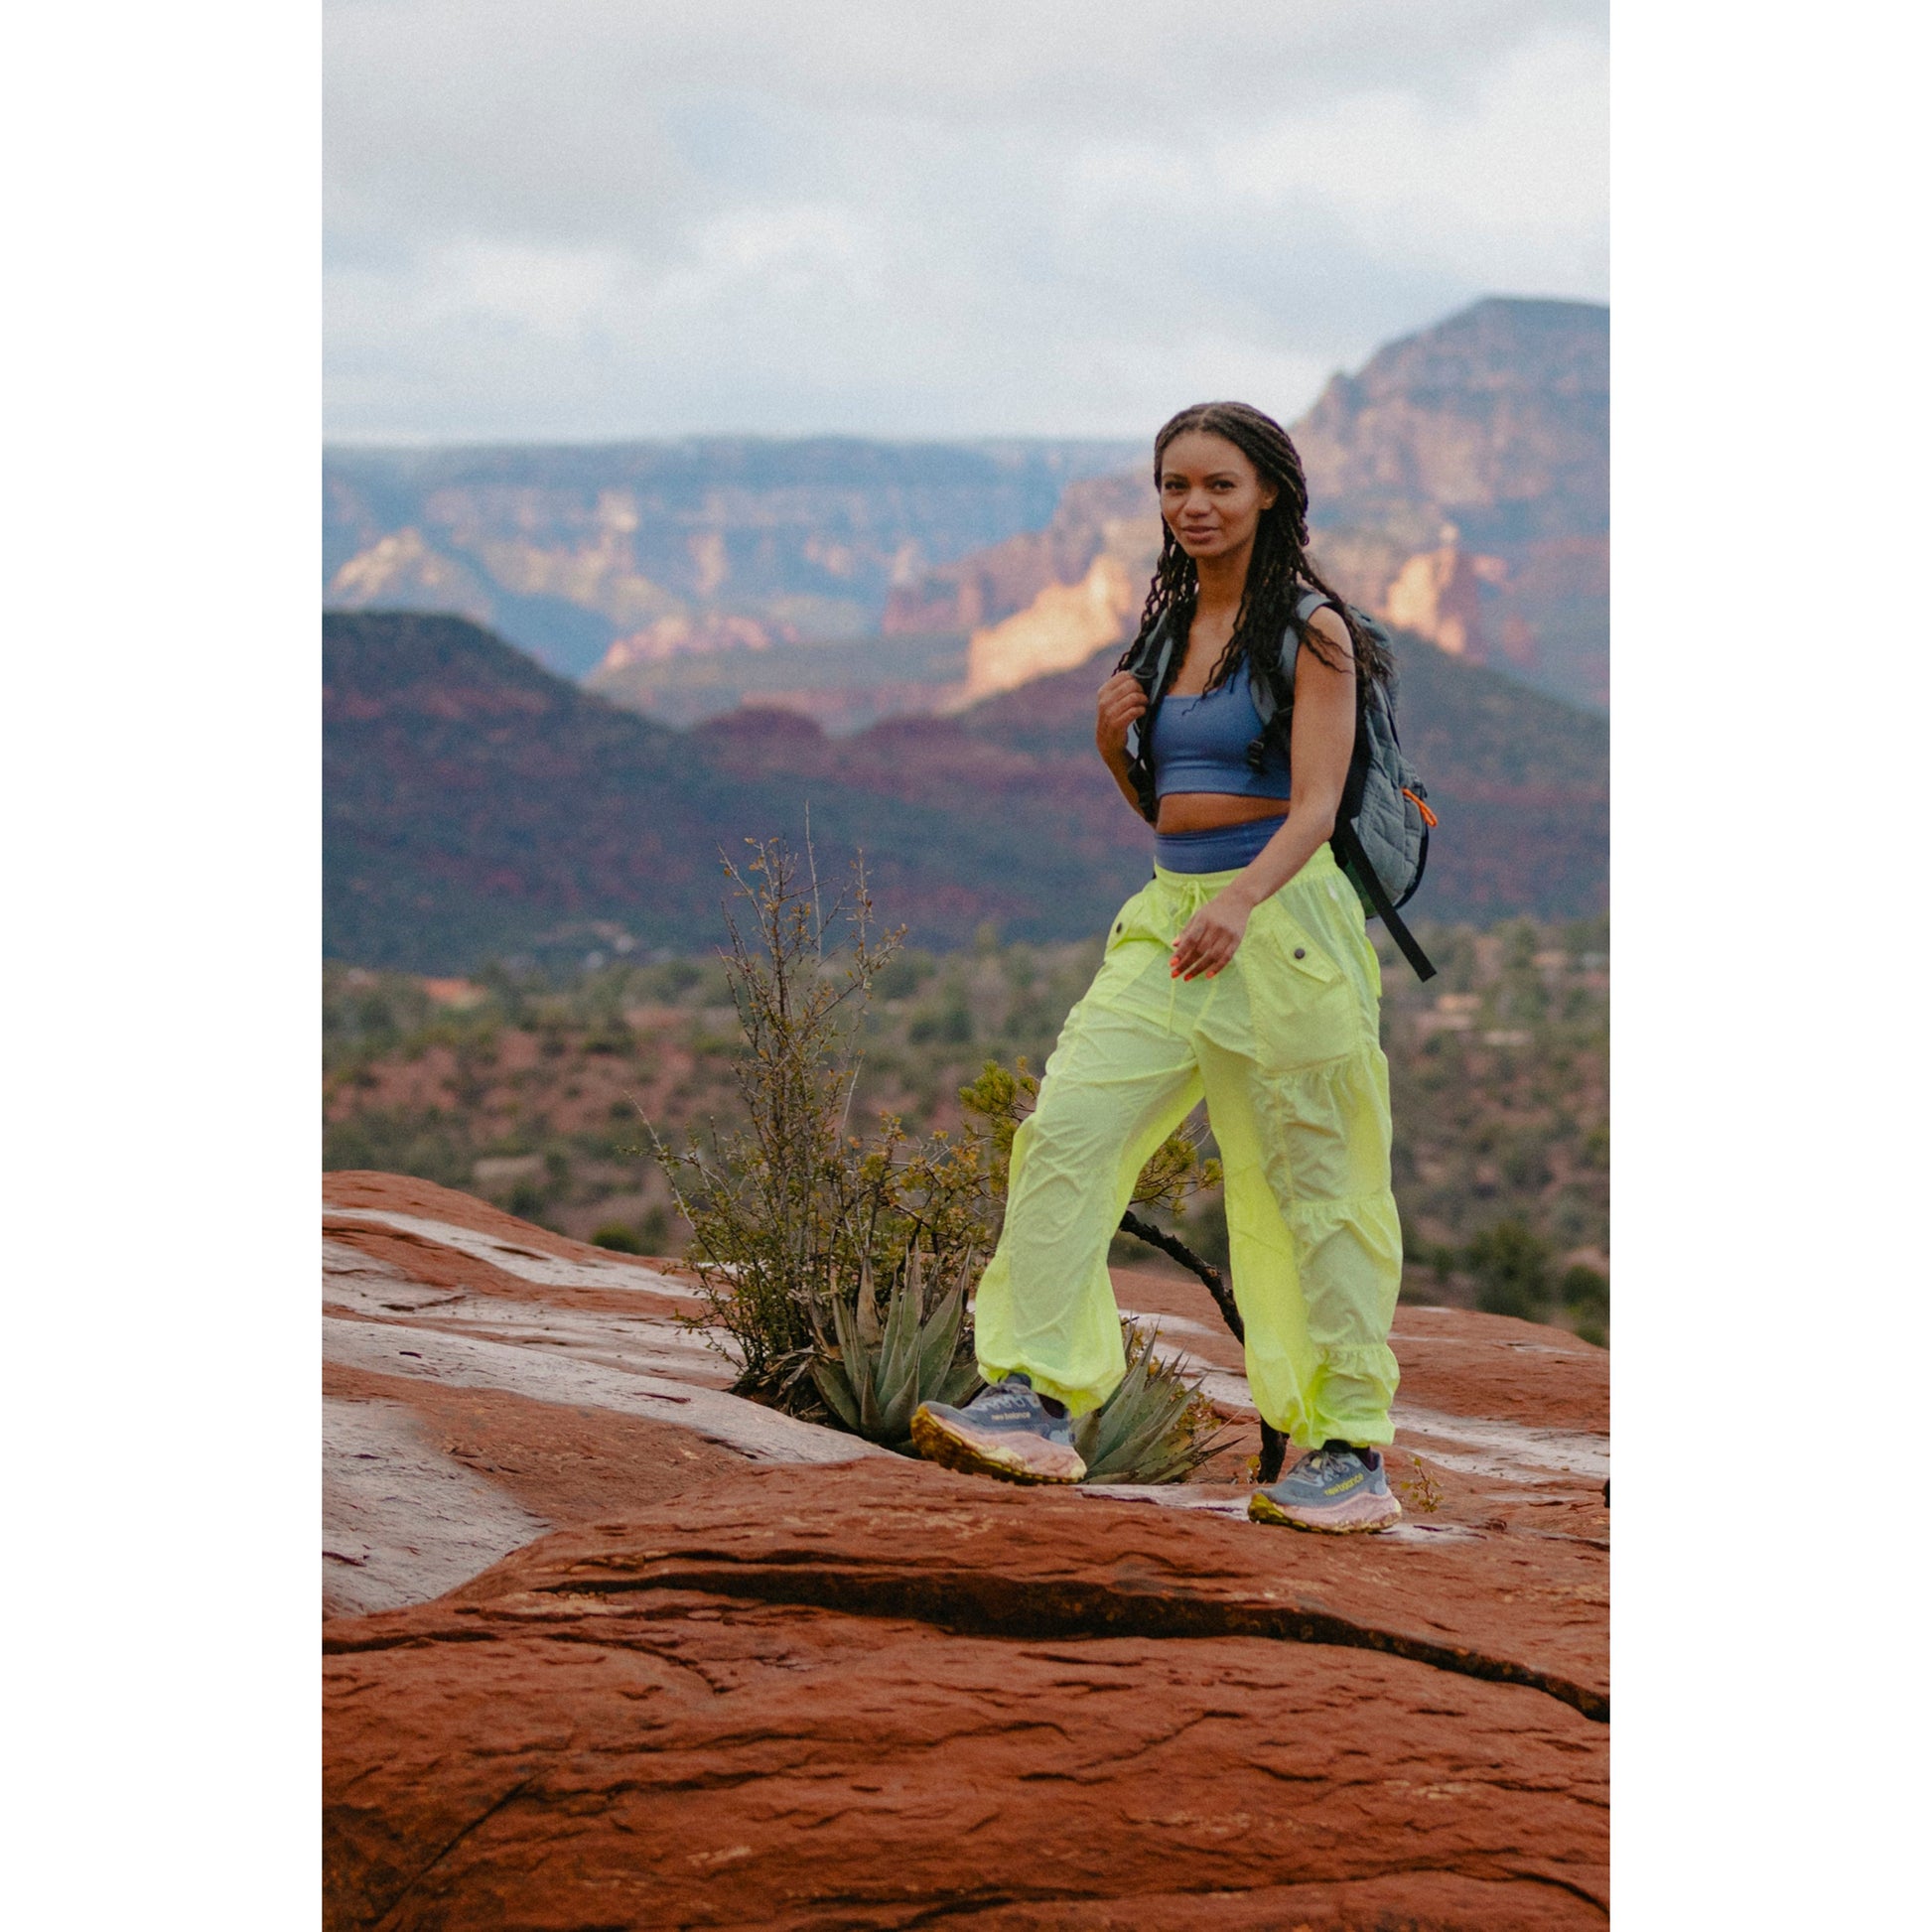 A woman in Free People Movement's Set Me Free Pant in Lime and a backpack standing on a red rocky trail, with mountains in the background.